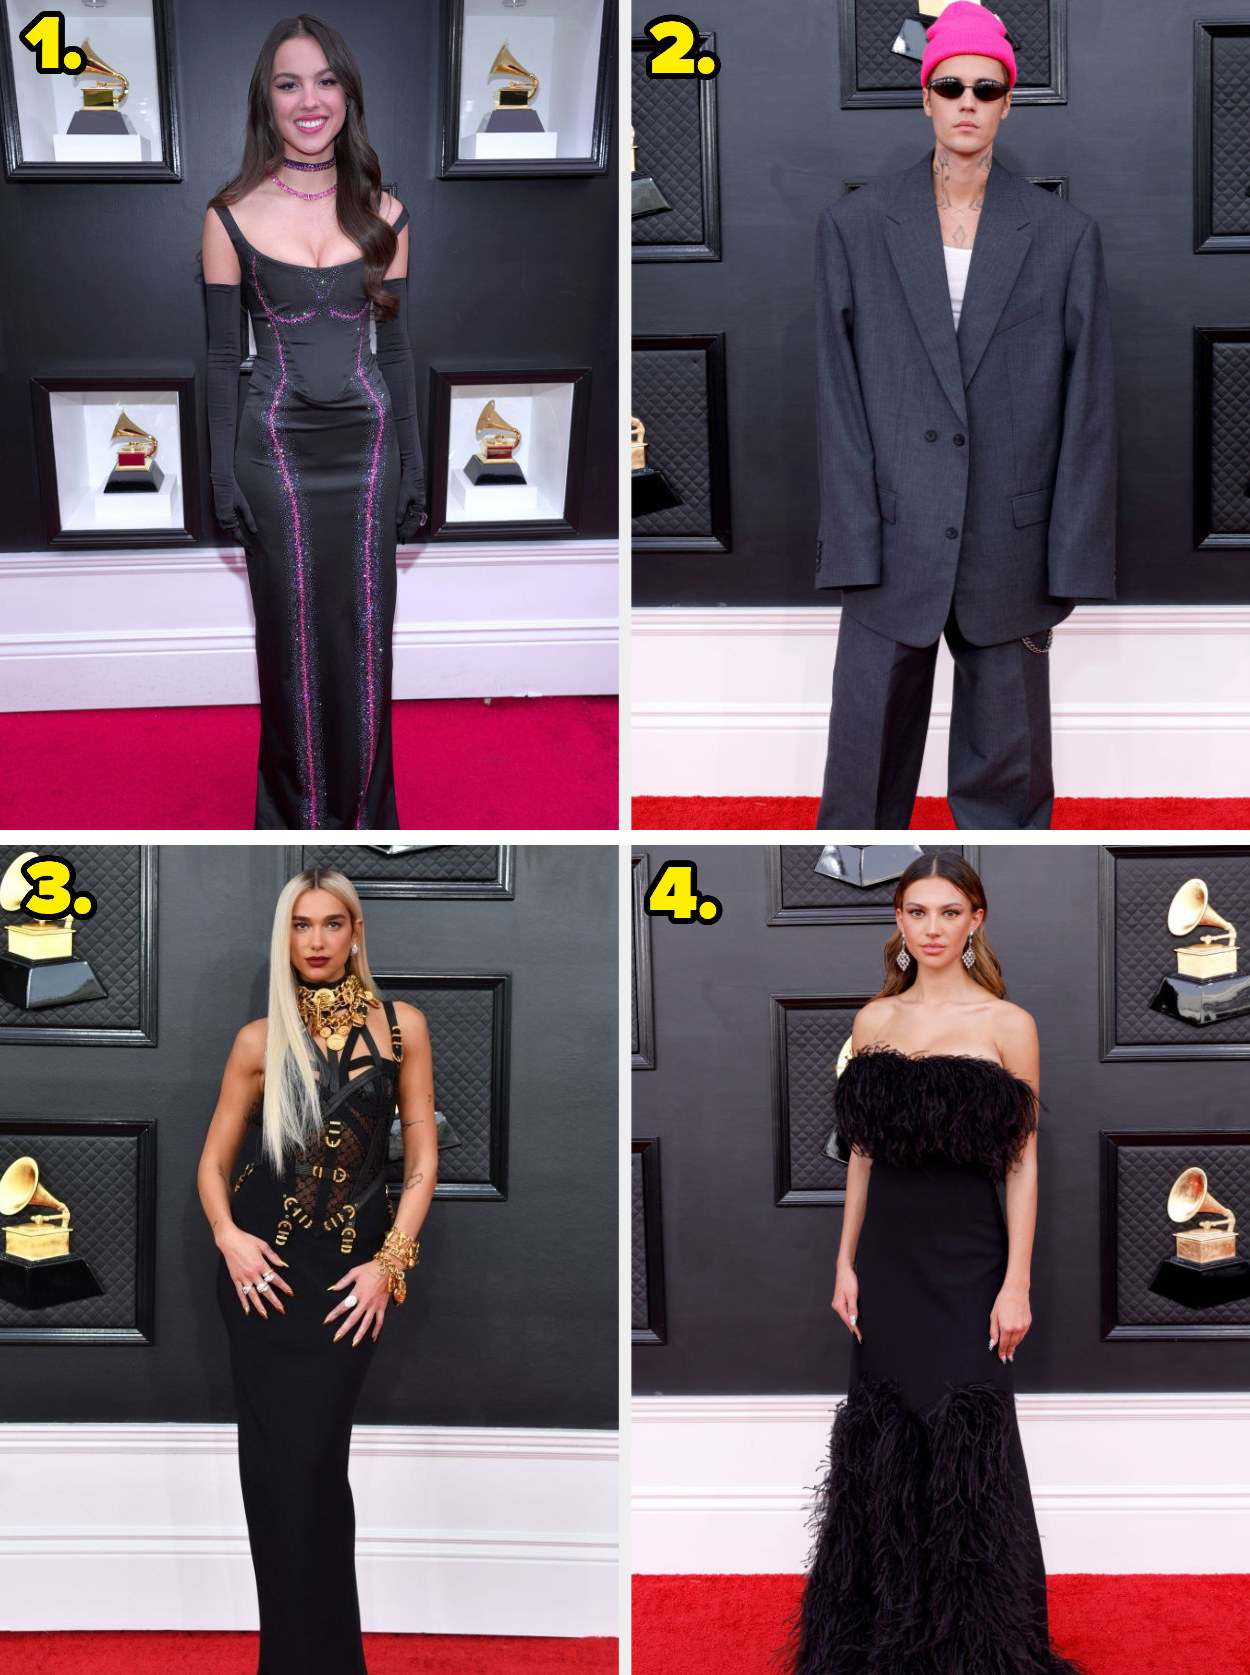 1. An off-the-shoulder gown with lines emphasizing the bust and hips, worn with long gloves. 2. A giant baggy suit worn with a beanie. 2. A strapless gown worn with a harness. 4. A strapless gown with feathers on the bodice and the skirt.